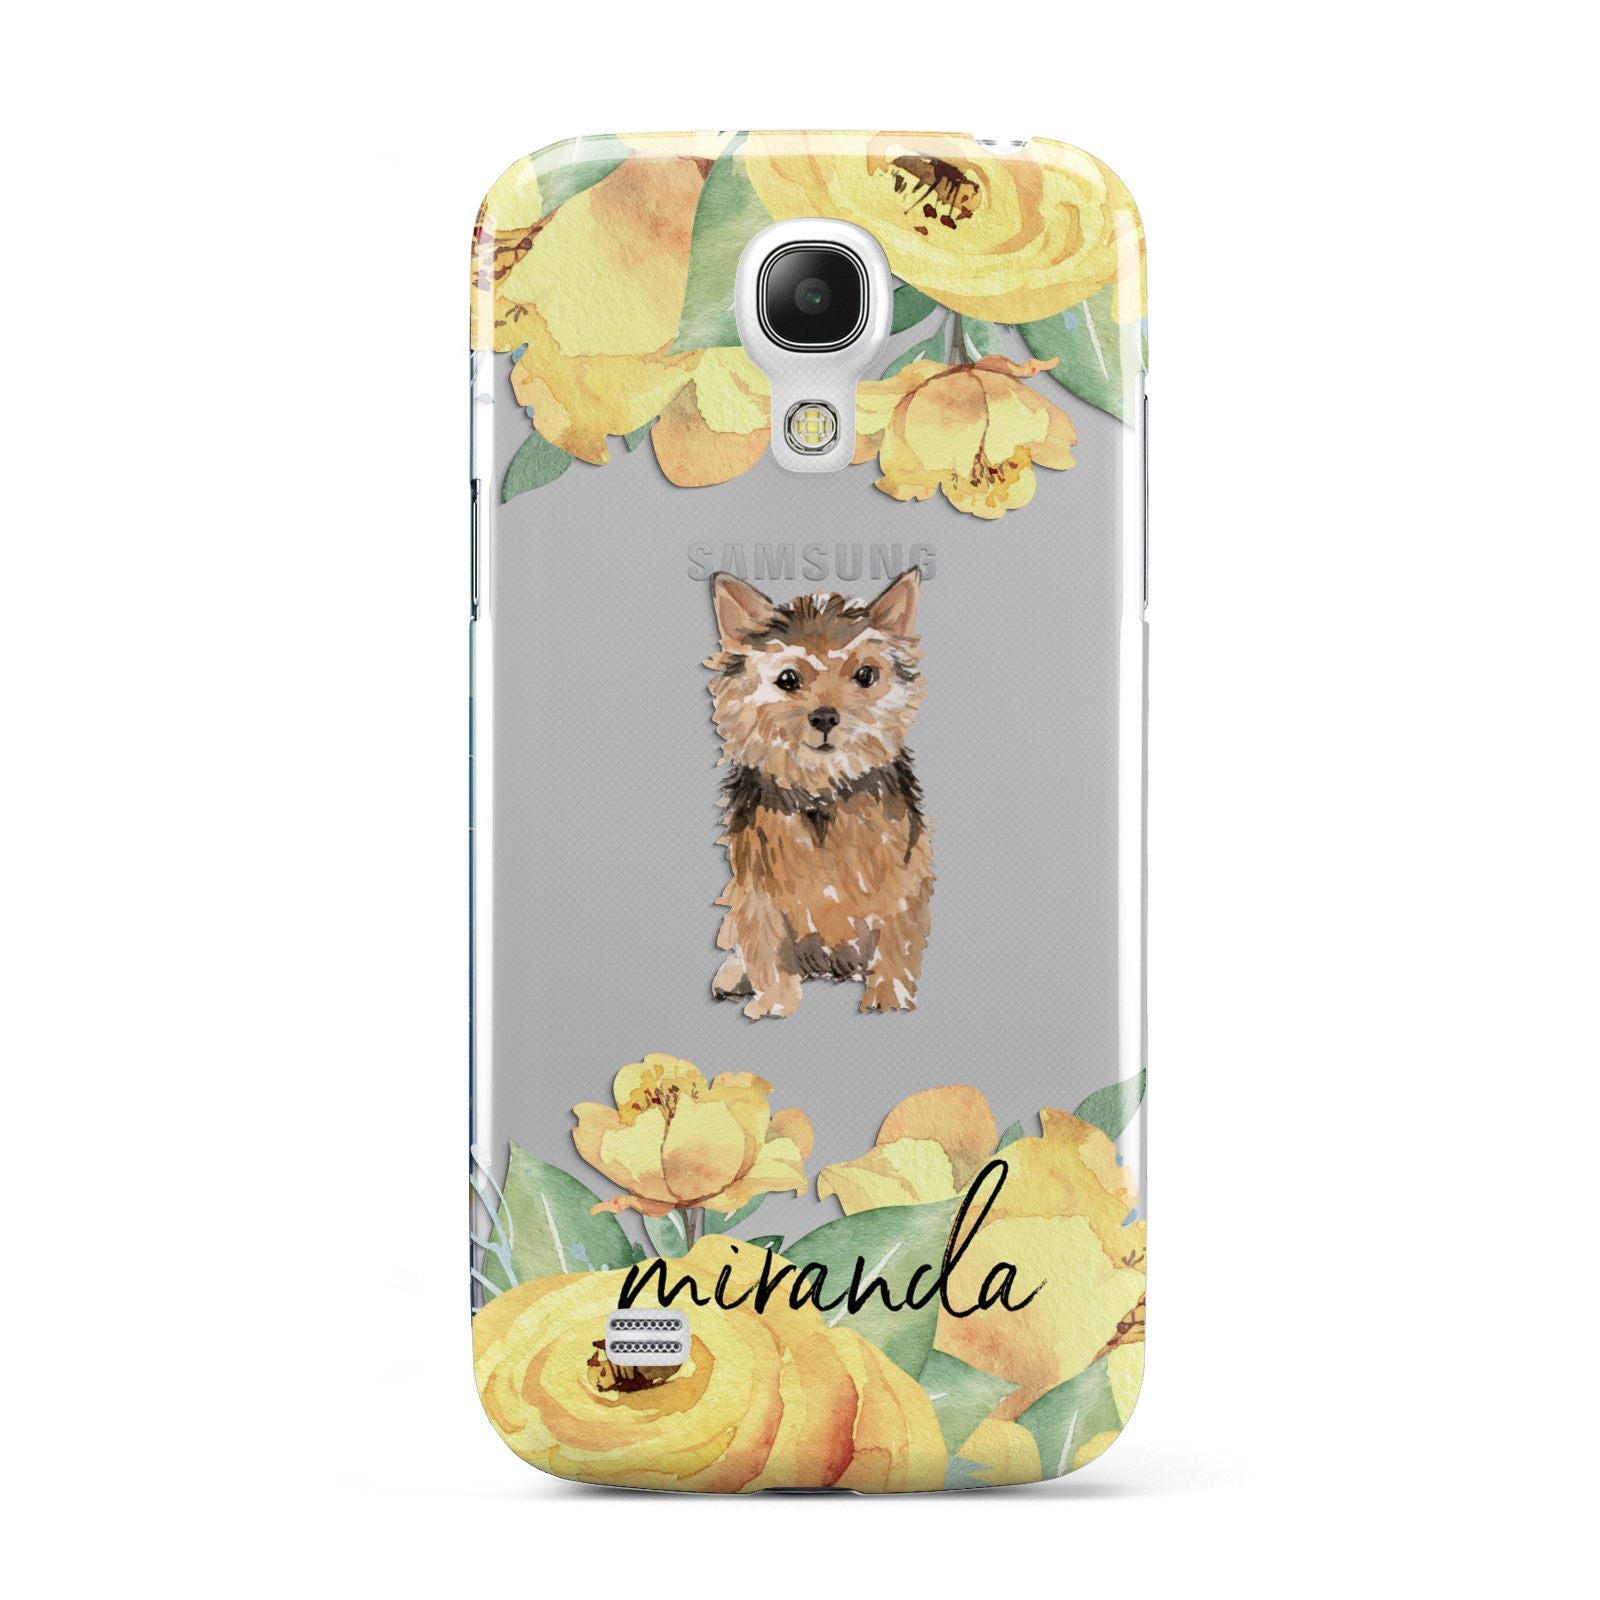 Personalised Norwich Terrier Samsung Galaxy S4 Mini Case